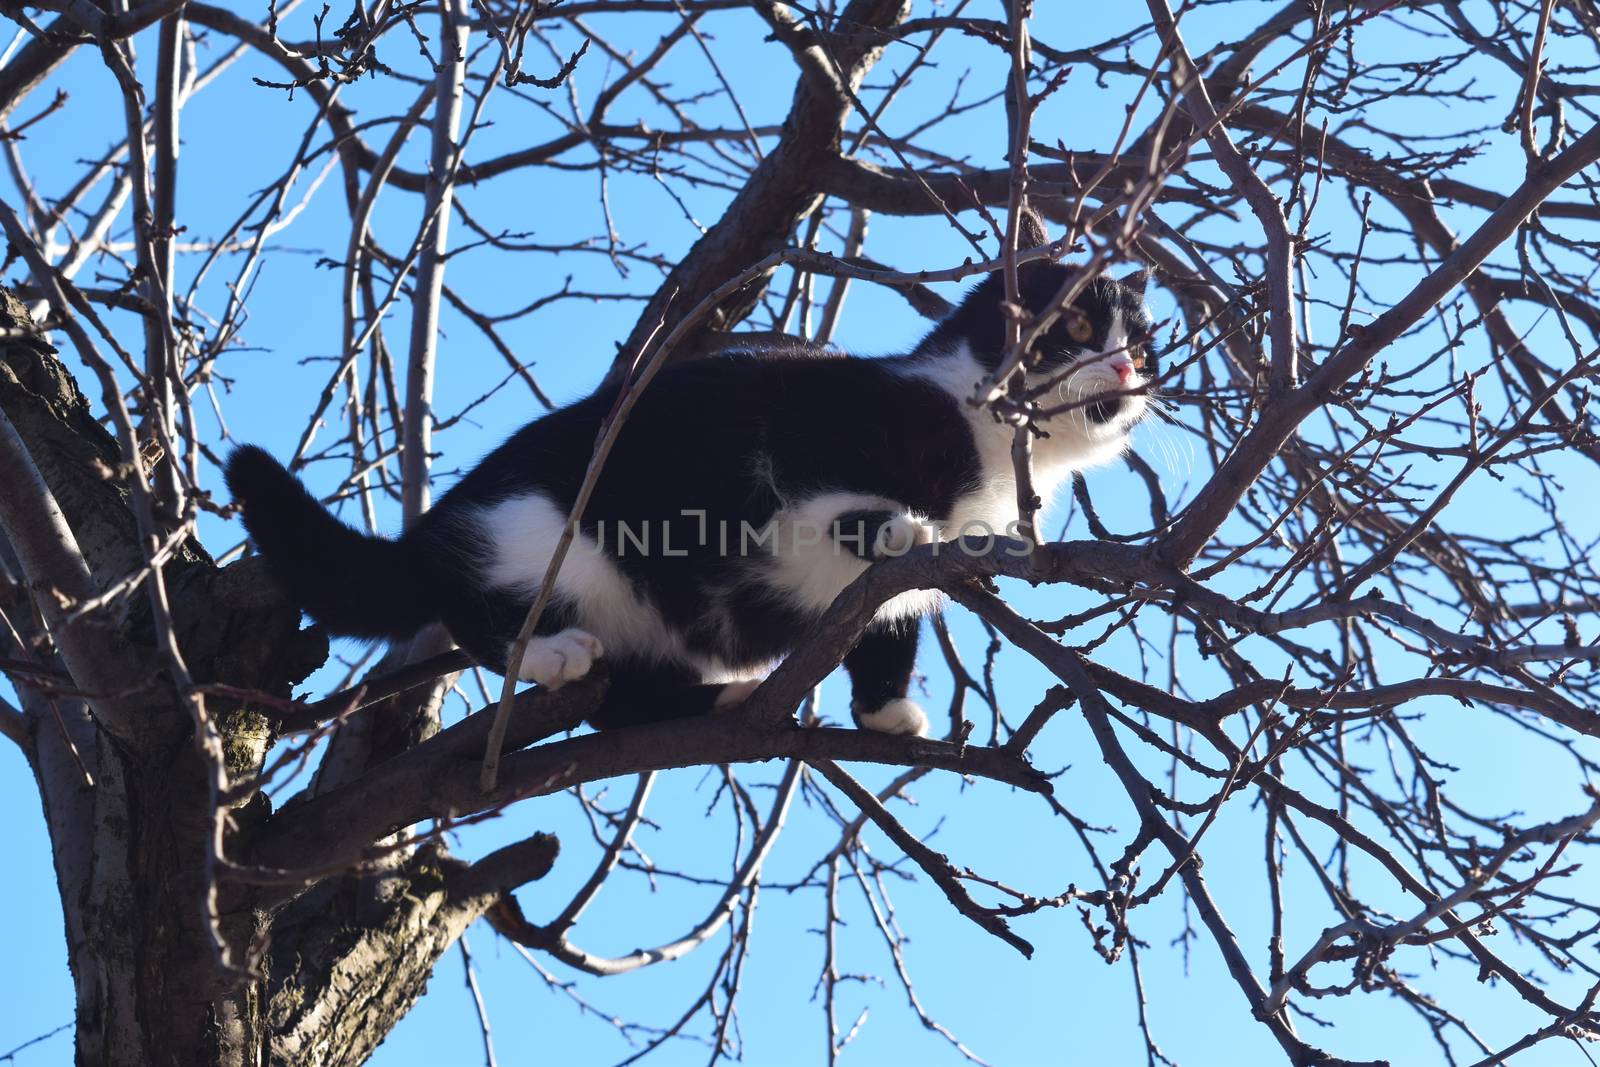 Kitten on a tree branch looks at the world. Natural background